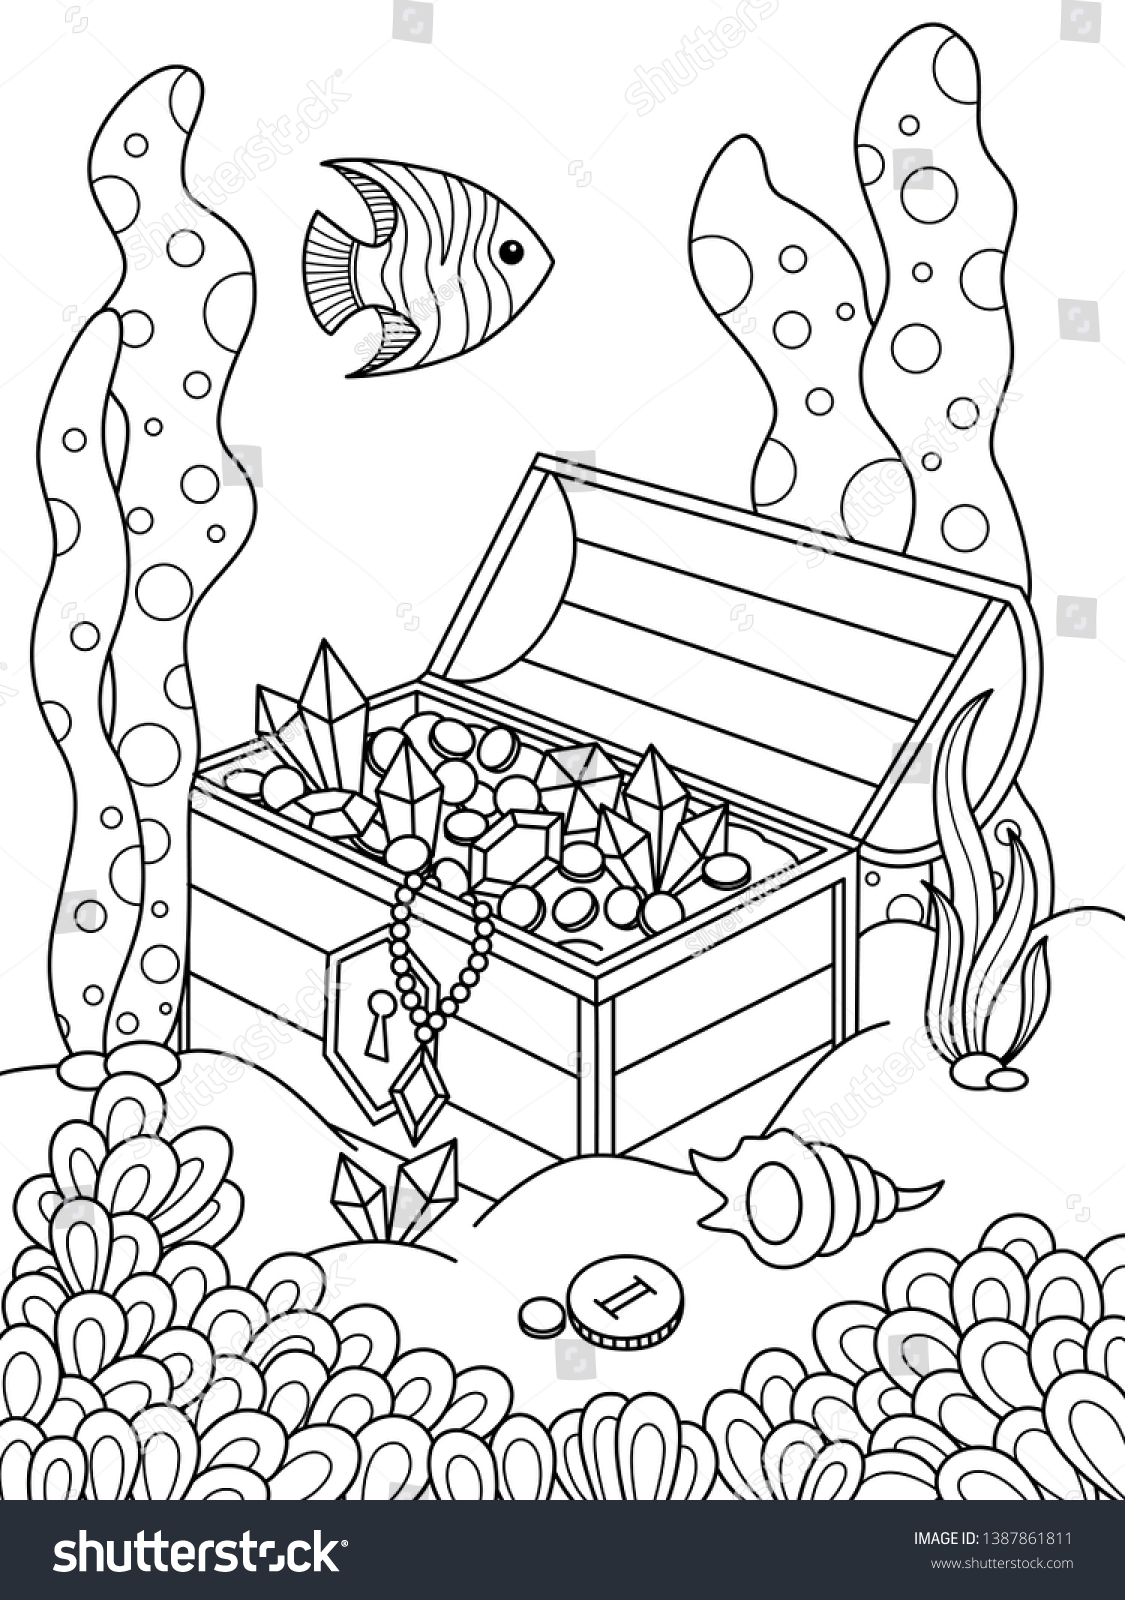 Sea doodle coloring book page sunken stock vector royalty free